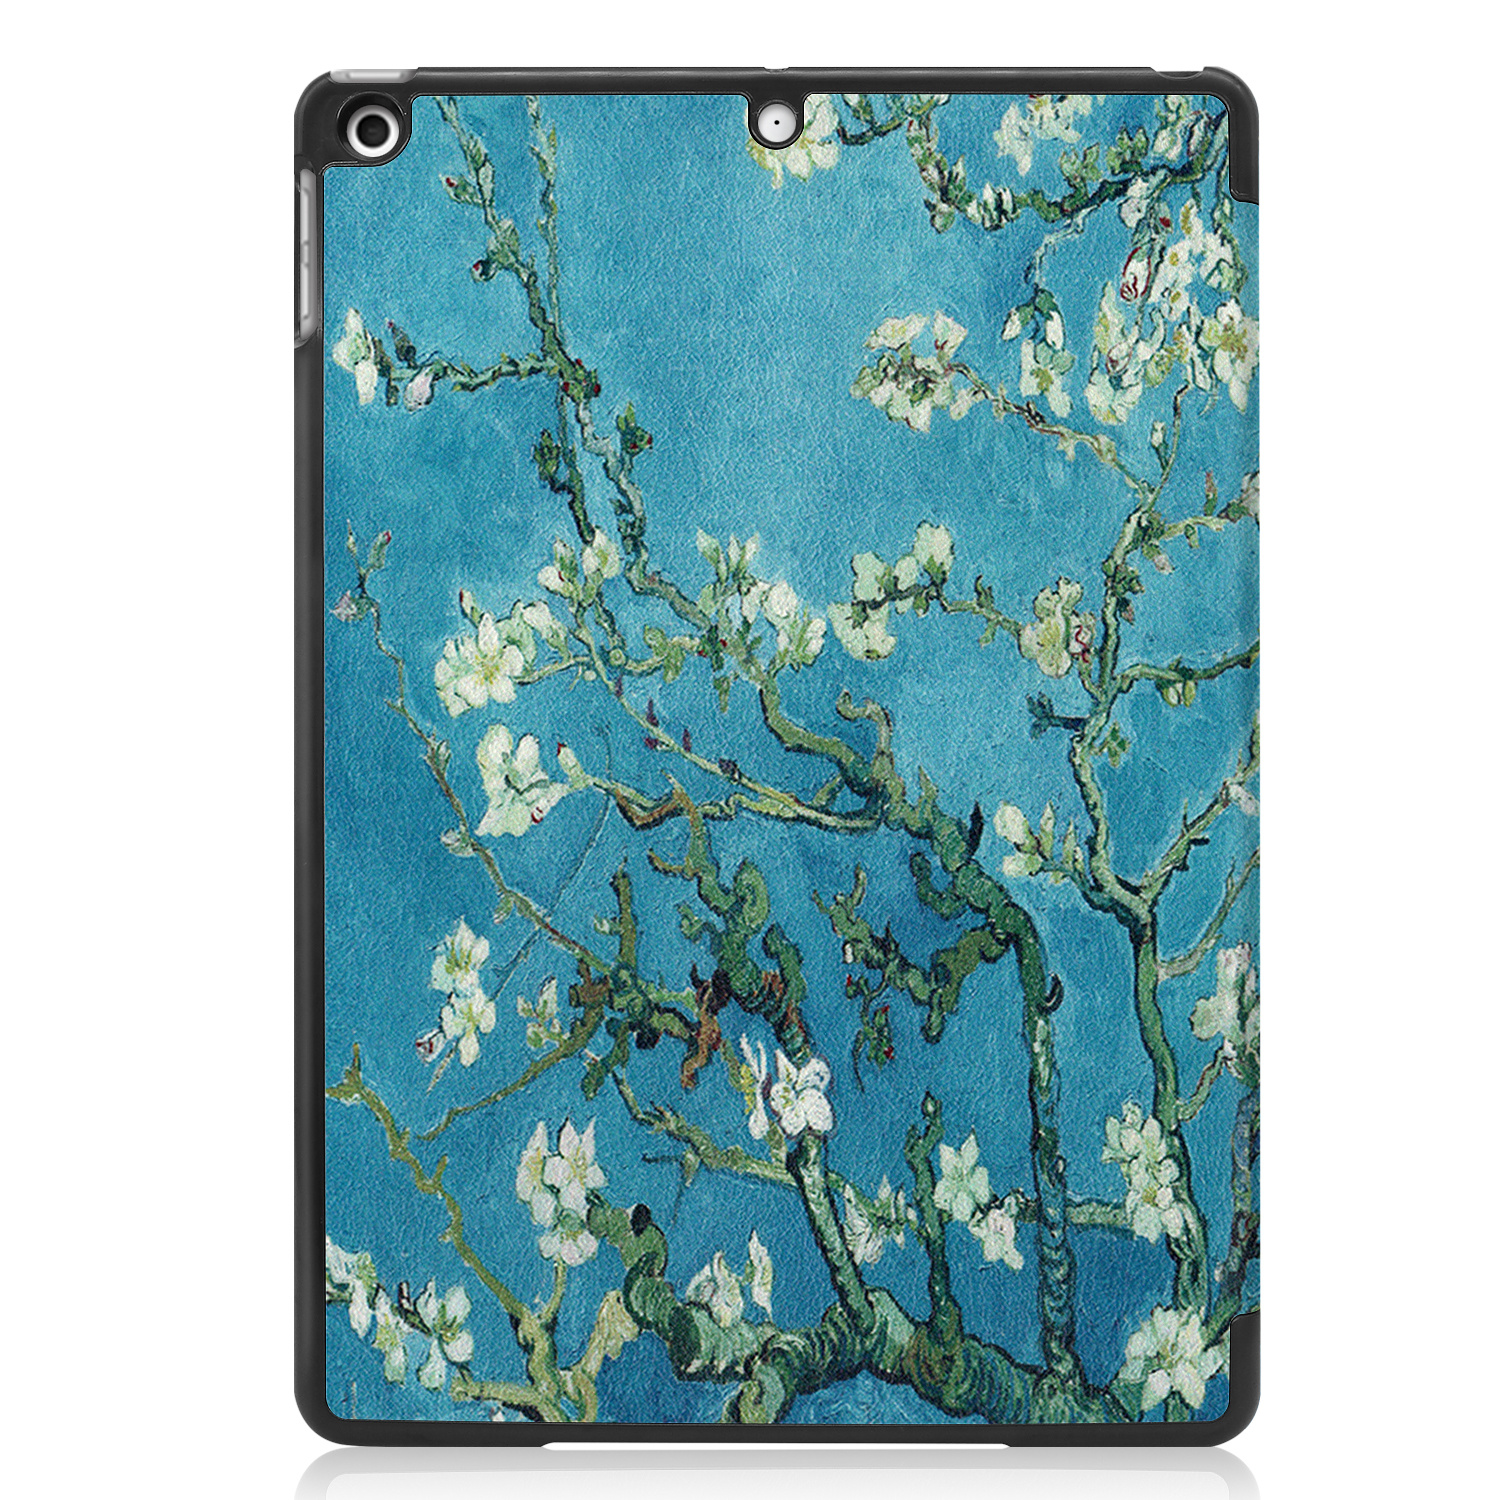 Nomfy iPad 10.2 2020 Hoesje Book Case Hoes - iPad 10.2 2020 Hoes Hardcover Case Hoesje - Bloesem